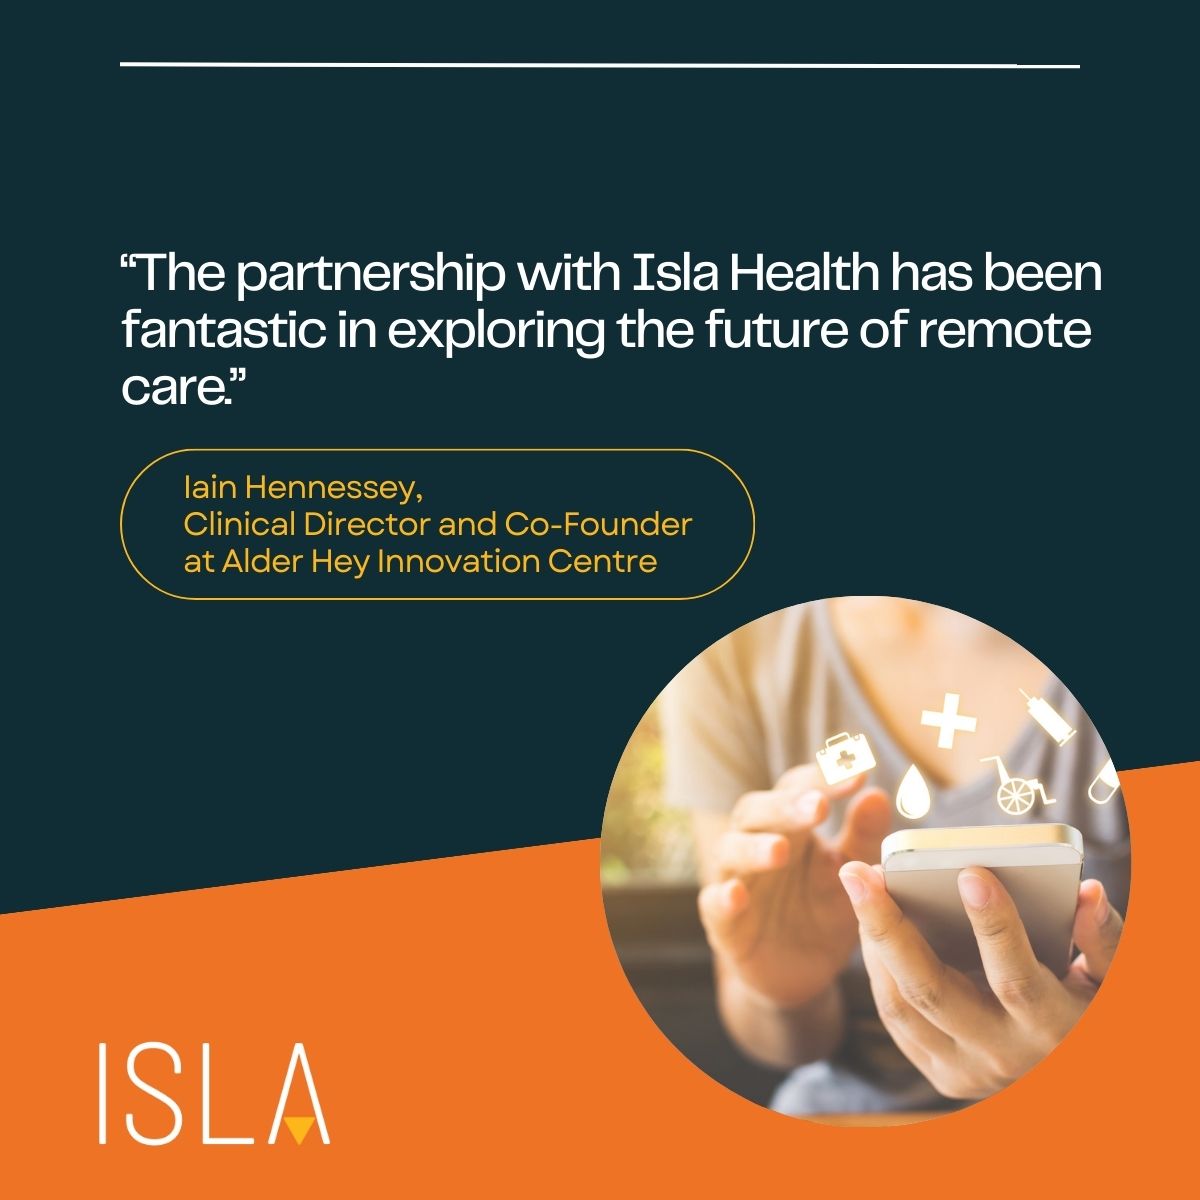 In the recent interview with @health1tech, @ihennessey, Clinical Director & Co-Founder at @AlderHeyInnov Centre commented on how the partnership with Isla has played a pivotal role in their remote care pathway. Find the full interview here 👉 hubs.la/Q02s5NS10